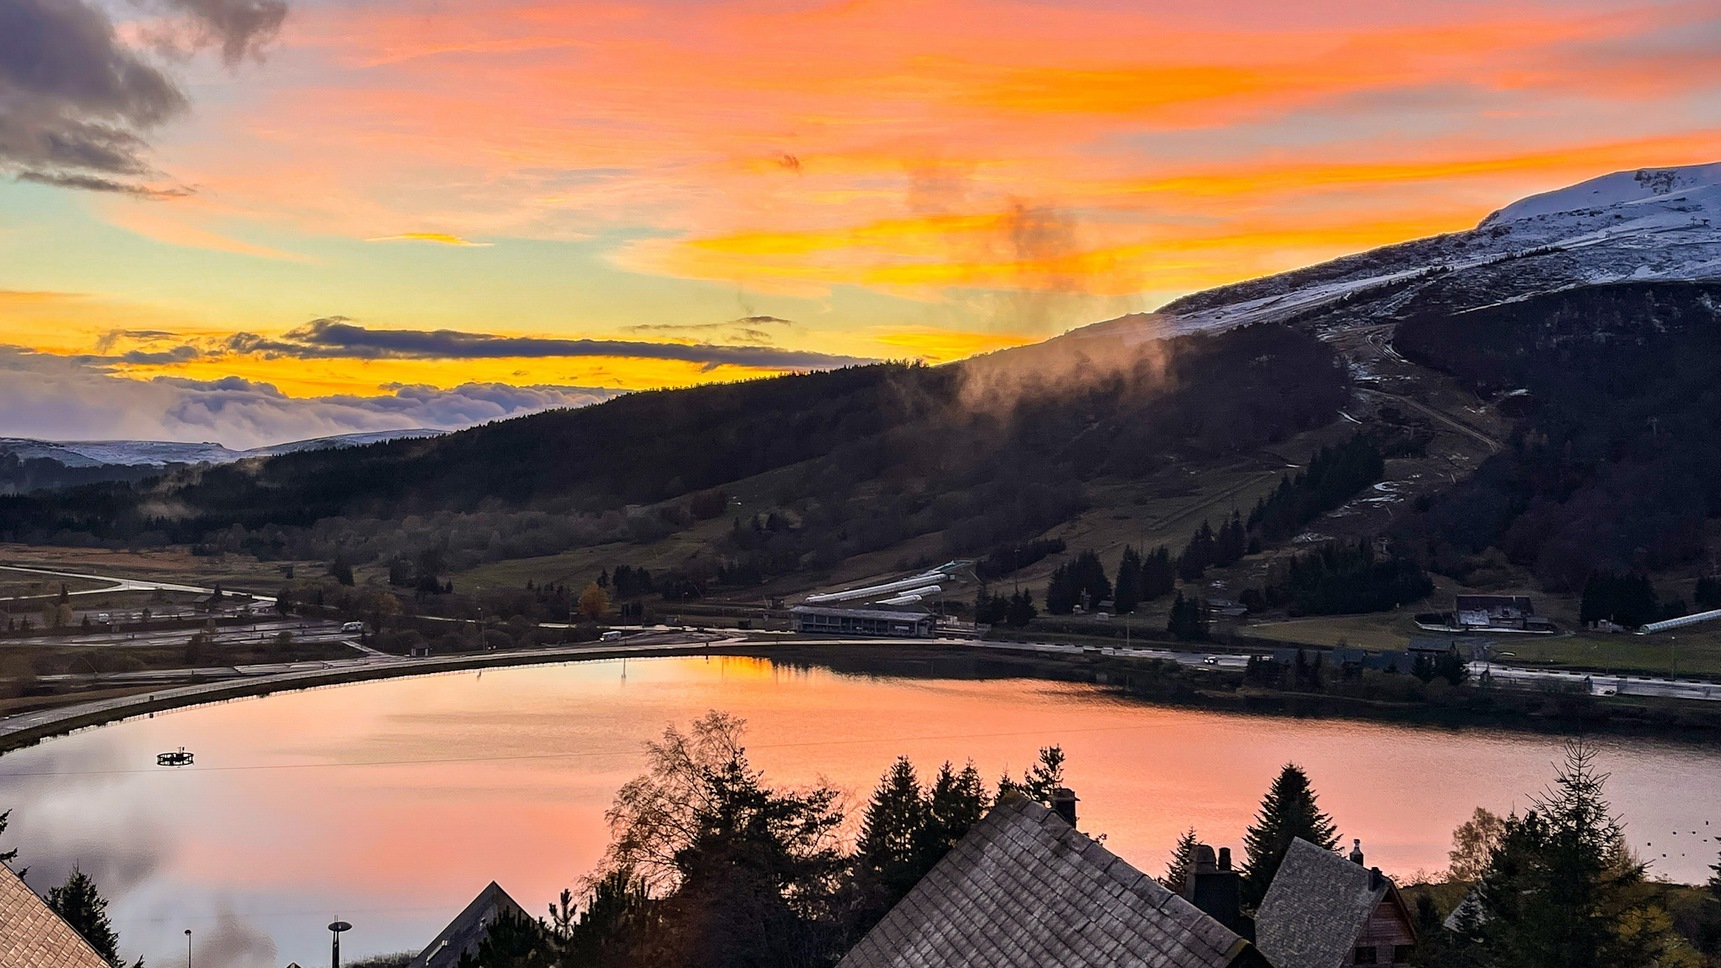 Sunset over Lac des Hermines in Sancy